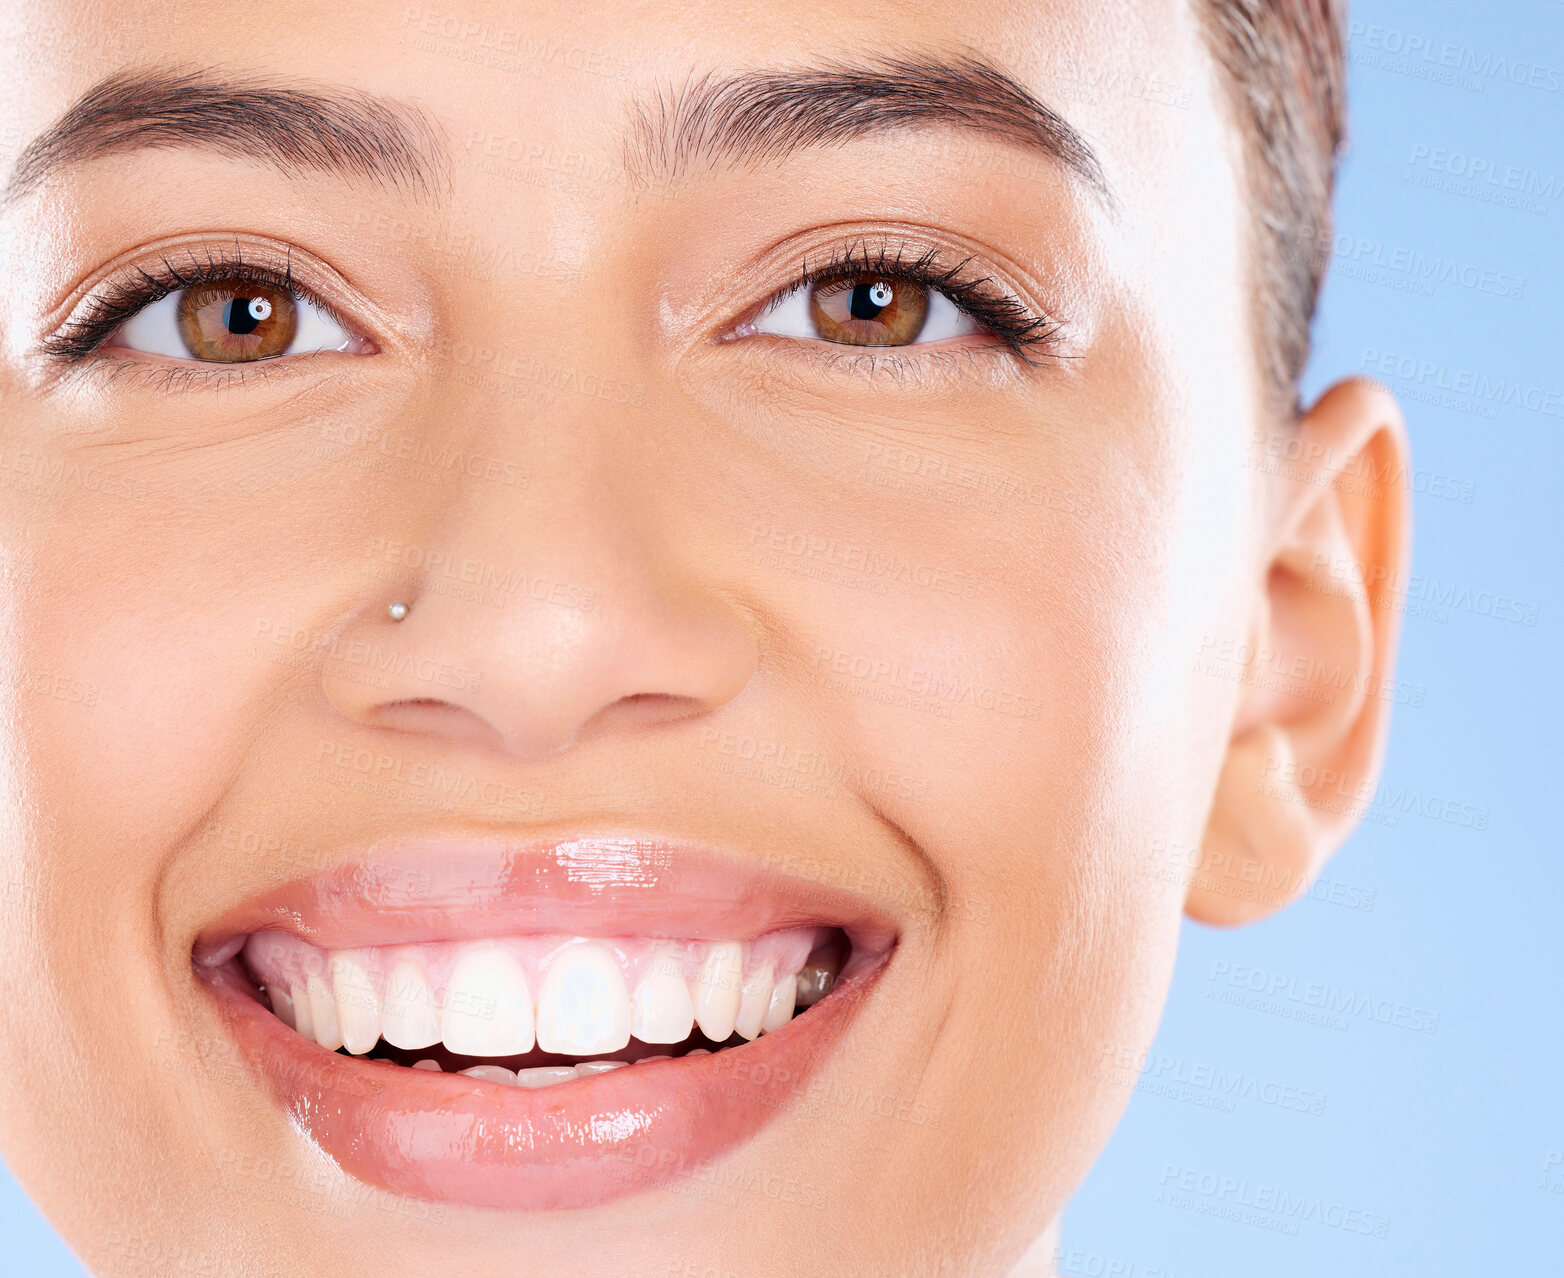 Buy stock photo Teeth, dental and face portrait of woman with clean smile, teeth whitening and oral self care on blue background. Tooth implant, healthcare and beauty model with makeup, cosmetics and facial skincare